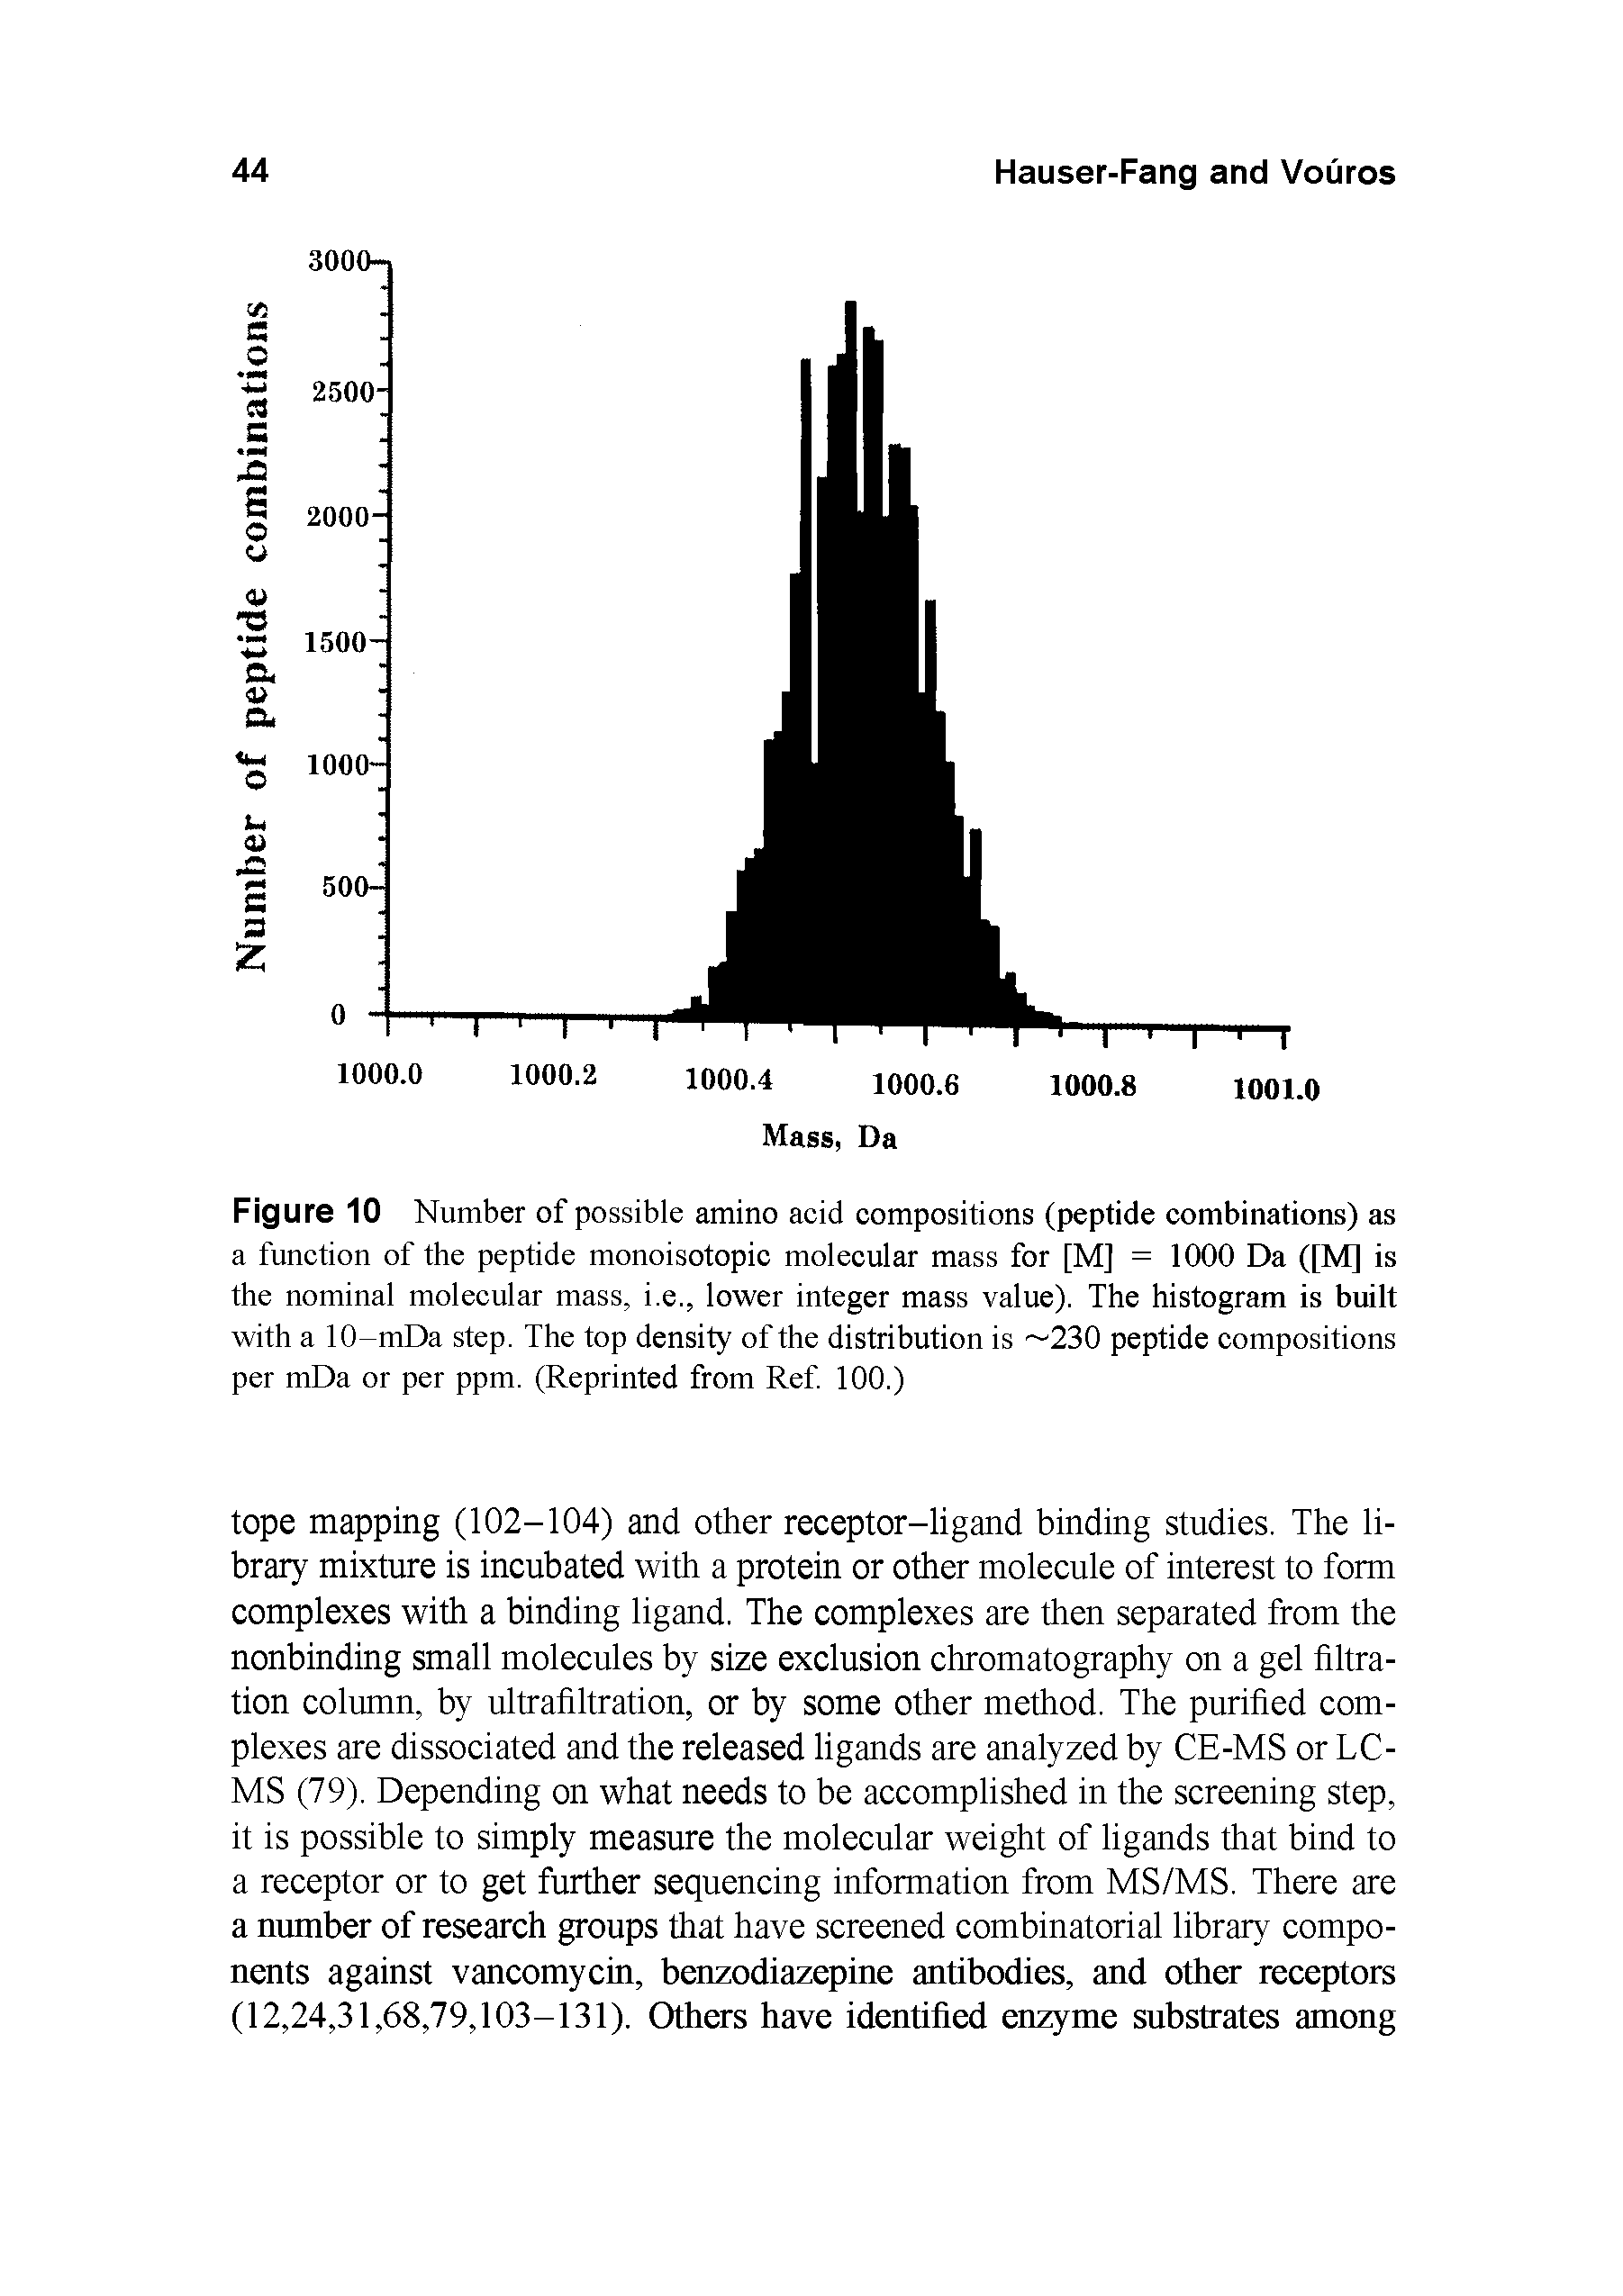 Figure 10 Number of possible amino acid compositions (peptide combinations) as a function of the peptide monoisotopic molecular mass for [M] = 1000 Da ([M] is the nominal molecular mass, i.e., lower integer mass value). The histogram is built with a 10-mDa step. The top density of the distribution is 230 peptide compositions per mDa or per ppm. (Reprinted from Ref. 100.)...